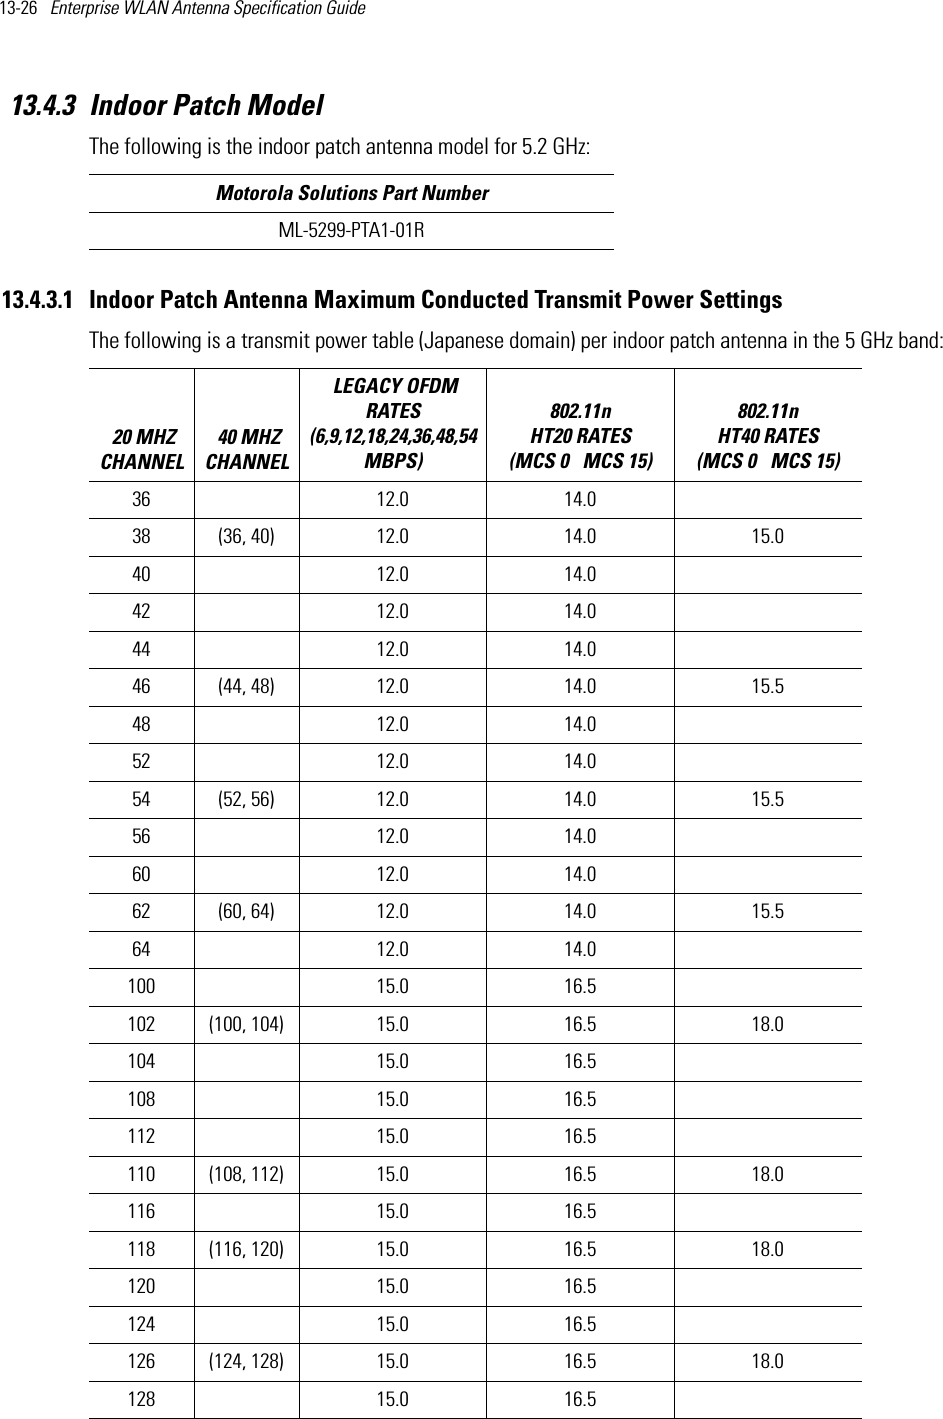 13-26   Enterprise WLAN Antenna Specification Guide 13.4.3 Indoor Patch ModelThe following is the indoor patch antenna model for 5.2 GHz:13.4.3.1 Indoor Patch Antenna Maximum Conducted Transmit Power SettingsThe following is a transmit power table (Japanese domain) per indoor patch antenna in the 5 GHz band:  Motorola Solutions Part NumberML-5299-PTA1-01R 20 MHZ CHANNEL 40 MHZ CHANNEL LEGACY OFDM RATES (6,9,12,18,24,36,48,54 MBPS) 802.11n HT20 RATES (MCS 0   MCS 15)802.11n HT40 RATES (MCS 0   MCS 15) 36  12.0 14.0  38 (36, 40) 12.0 14.0 15.040  12.0 14.0  42  12.0 14.0  44  12.0 14.0  46 (44, 48) 12.0 14.0 15.548  12.0 14.0  52  12.0 14.0  54 (52, 56) 12.0 14.0 15.556  12.0 14.0  60  12.0 14.0  62 (60, 64) 12.0 14.0 15.564  12.0 14.0  100  15.0 16.5  102 (100, 104) 15.0 16.5 18.0104  15.0 16.5  108  15.0 16.5  112  15.0 16.5  110 (108, 112) 15.0 16.5 18.0116  15.0 16.5  118 (116, 120) 15.0 16.5 18.0120  15.0 16.5  124  15.0 16.5  126 (124, 128) 15.0 16.5 18.0128  15.0 16.5  